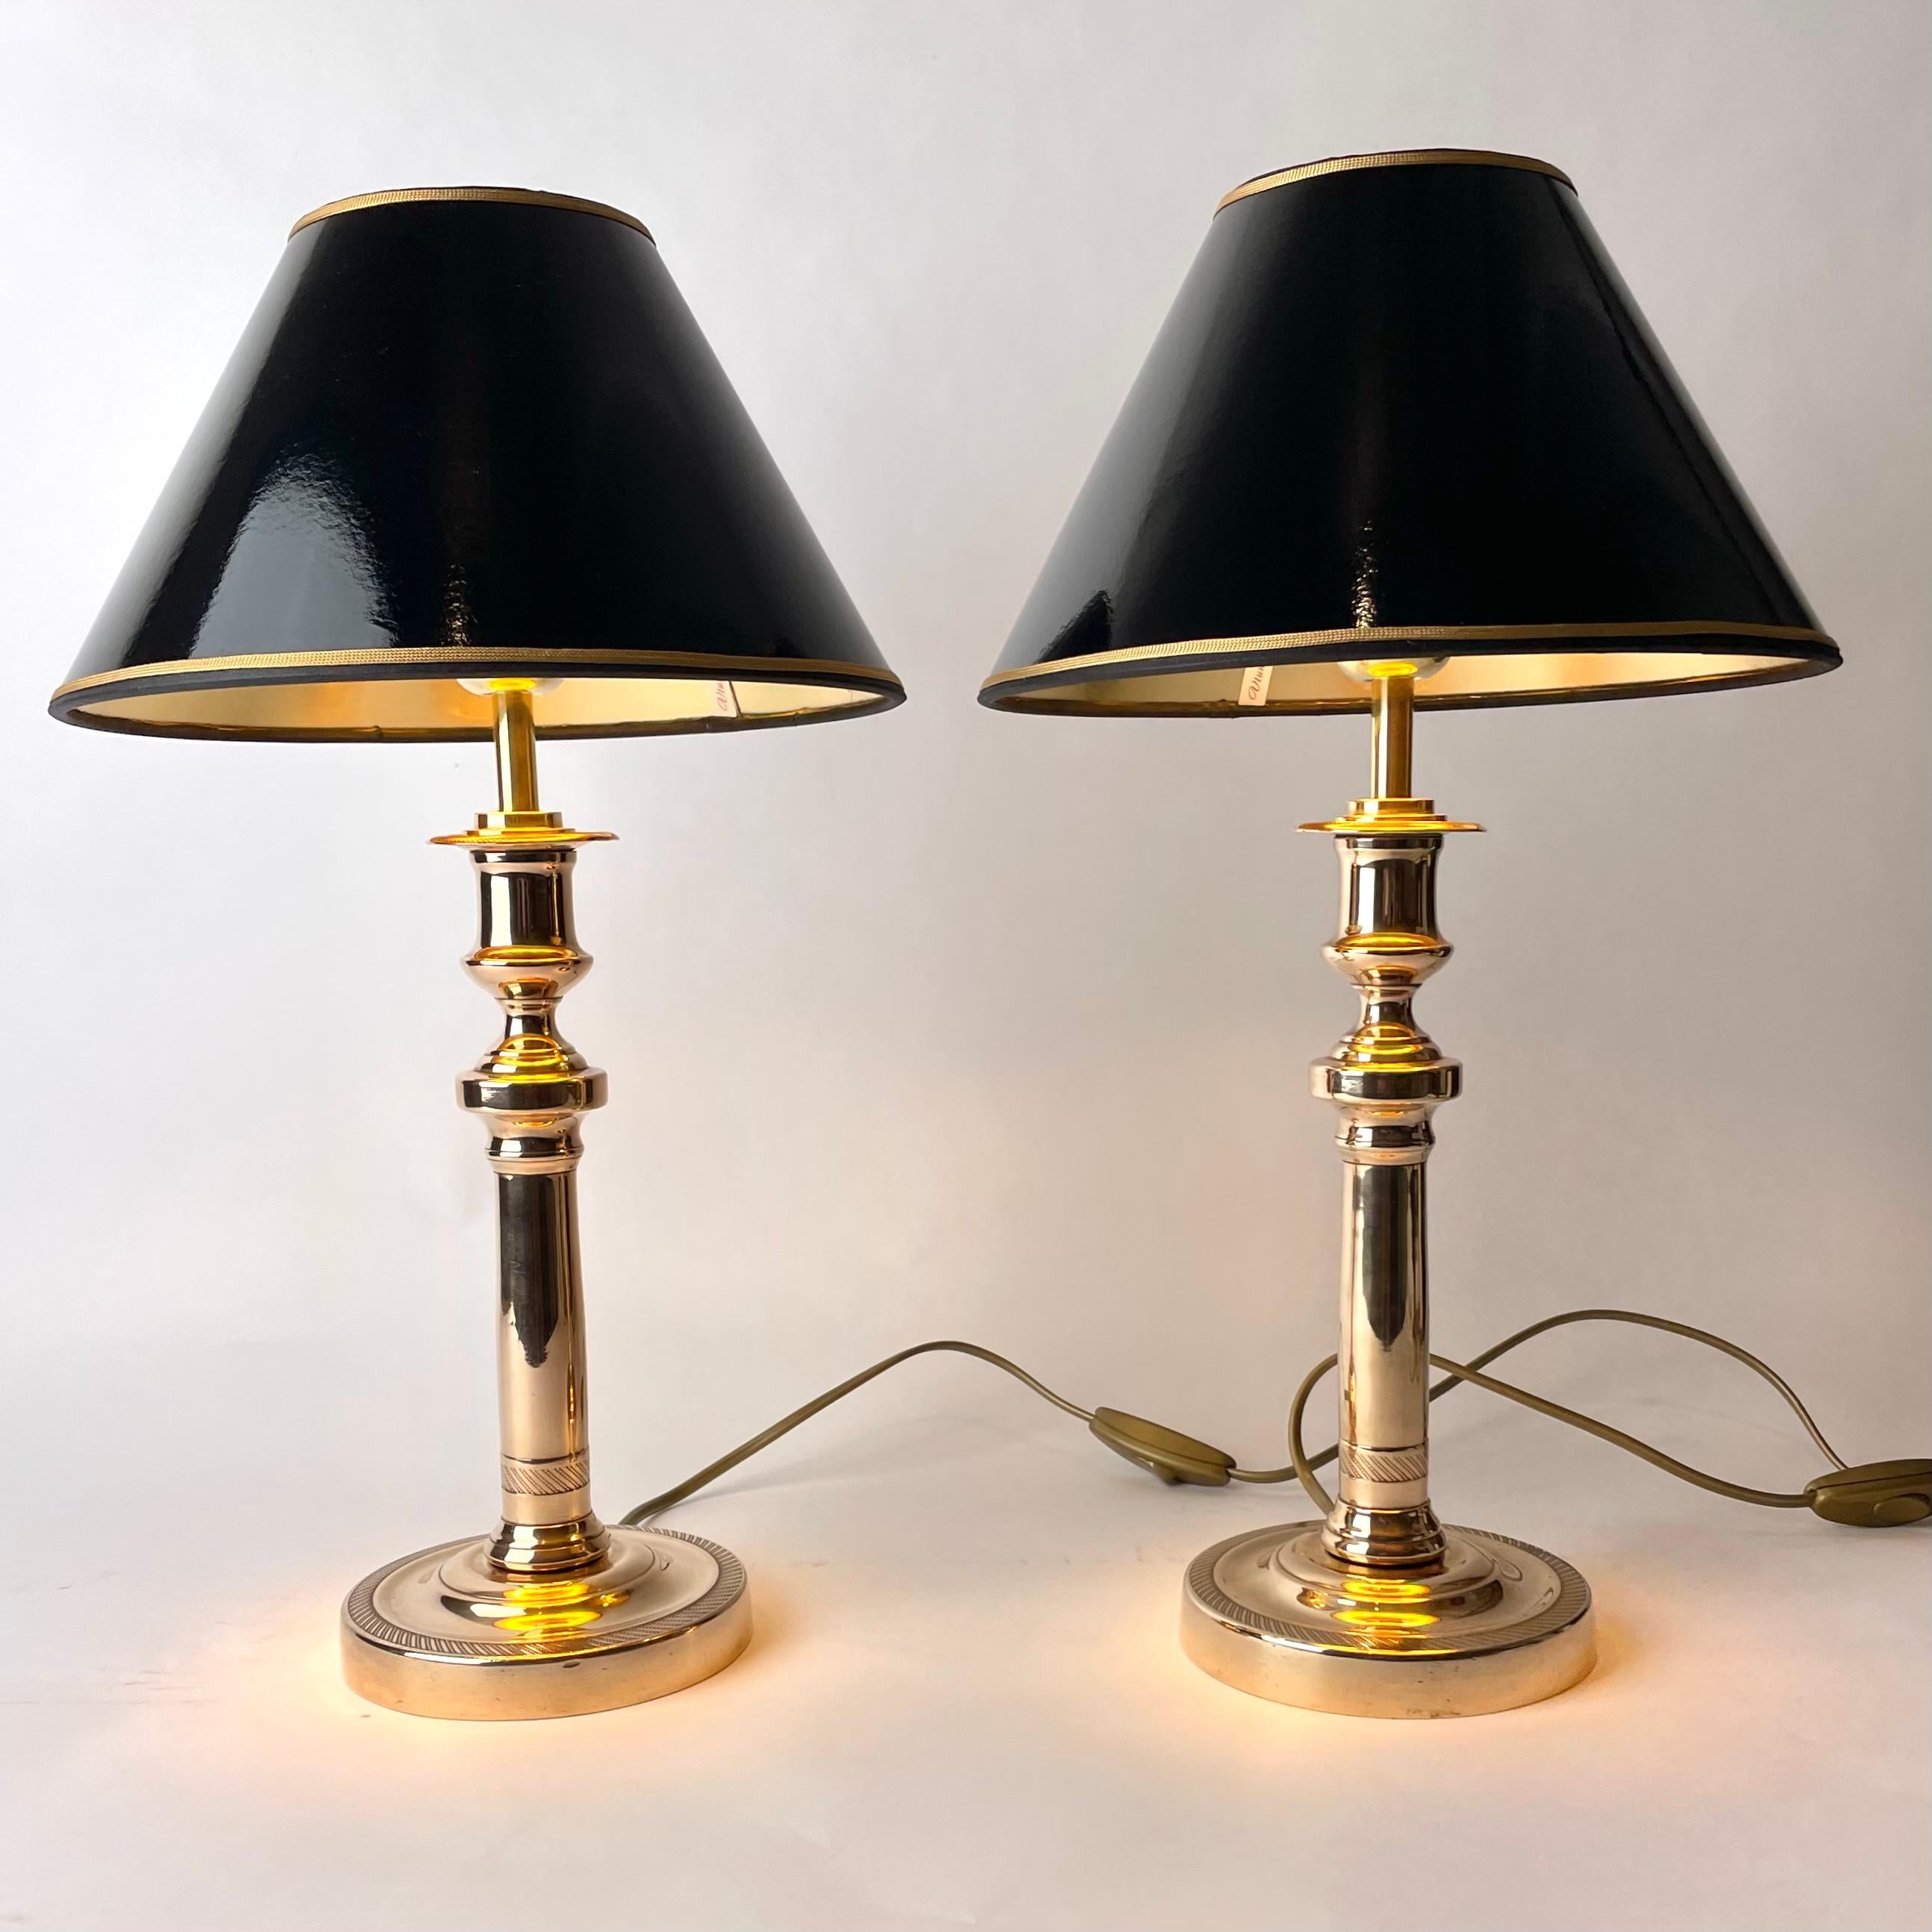 Beautiful pair of Empire Table Lamps in Bronze. Originally a pair of Empire candlesticks from the 1820s, converted to table lamps in the early 20th Century.

Newly rewired electricity 

New lampshades in black lacquer with gilding on the inside,